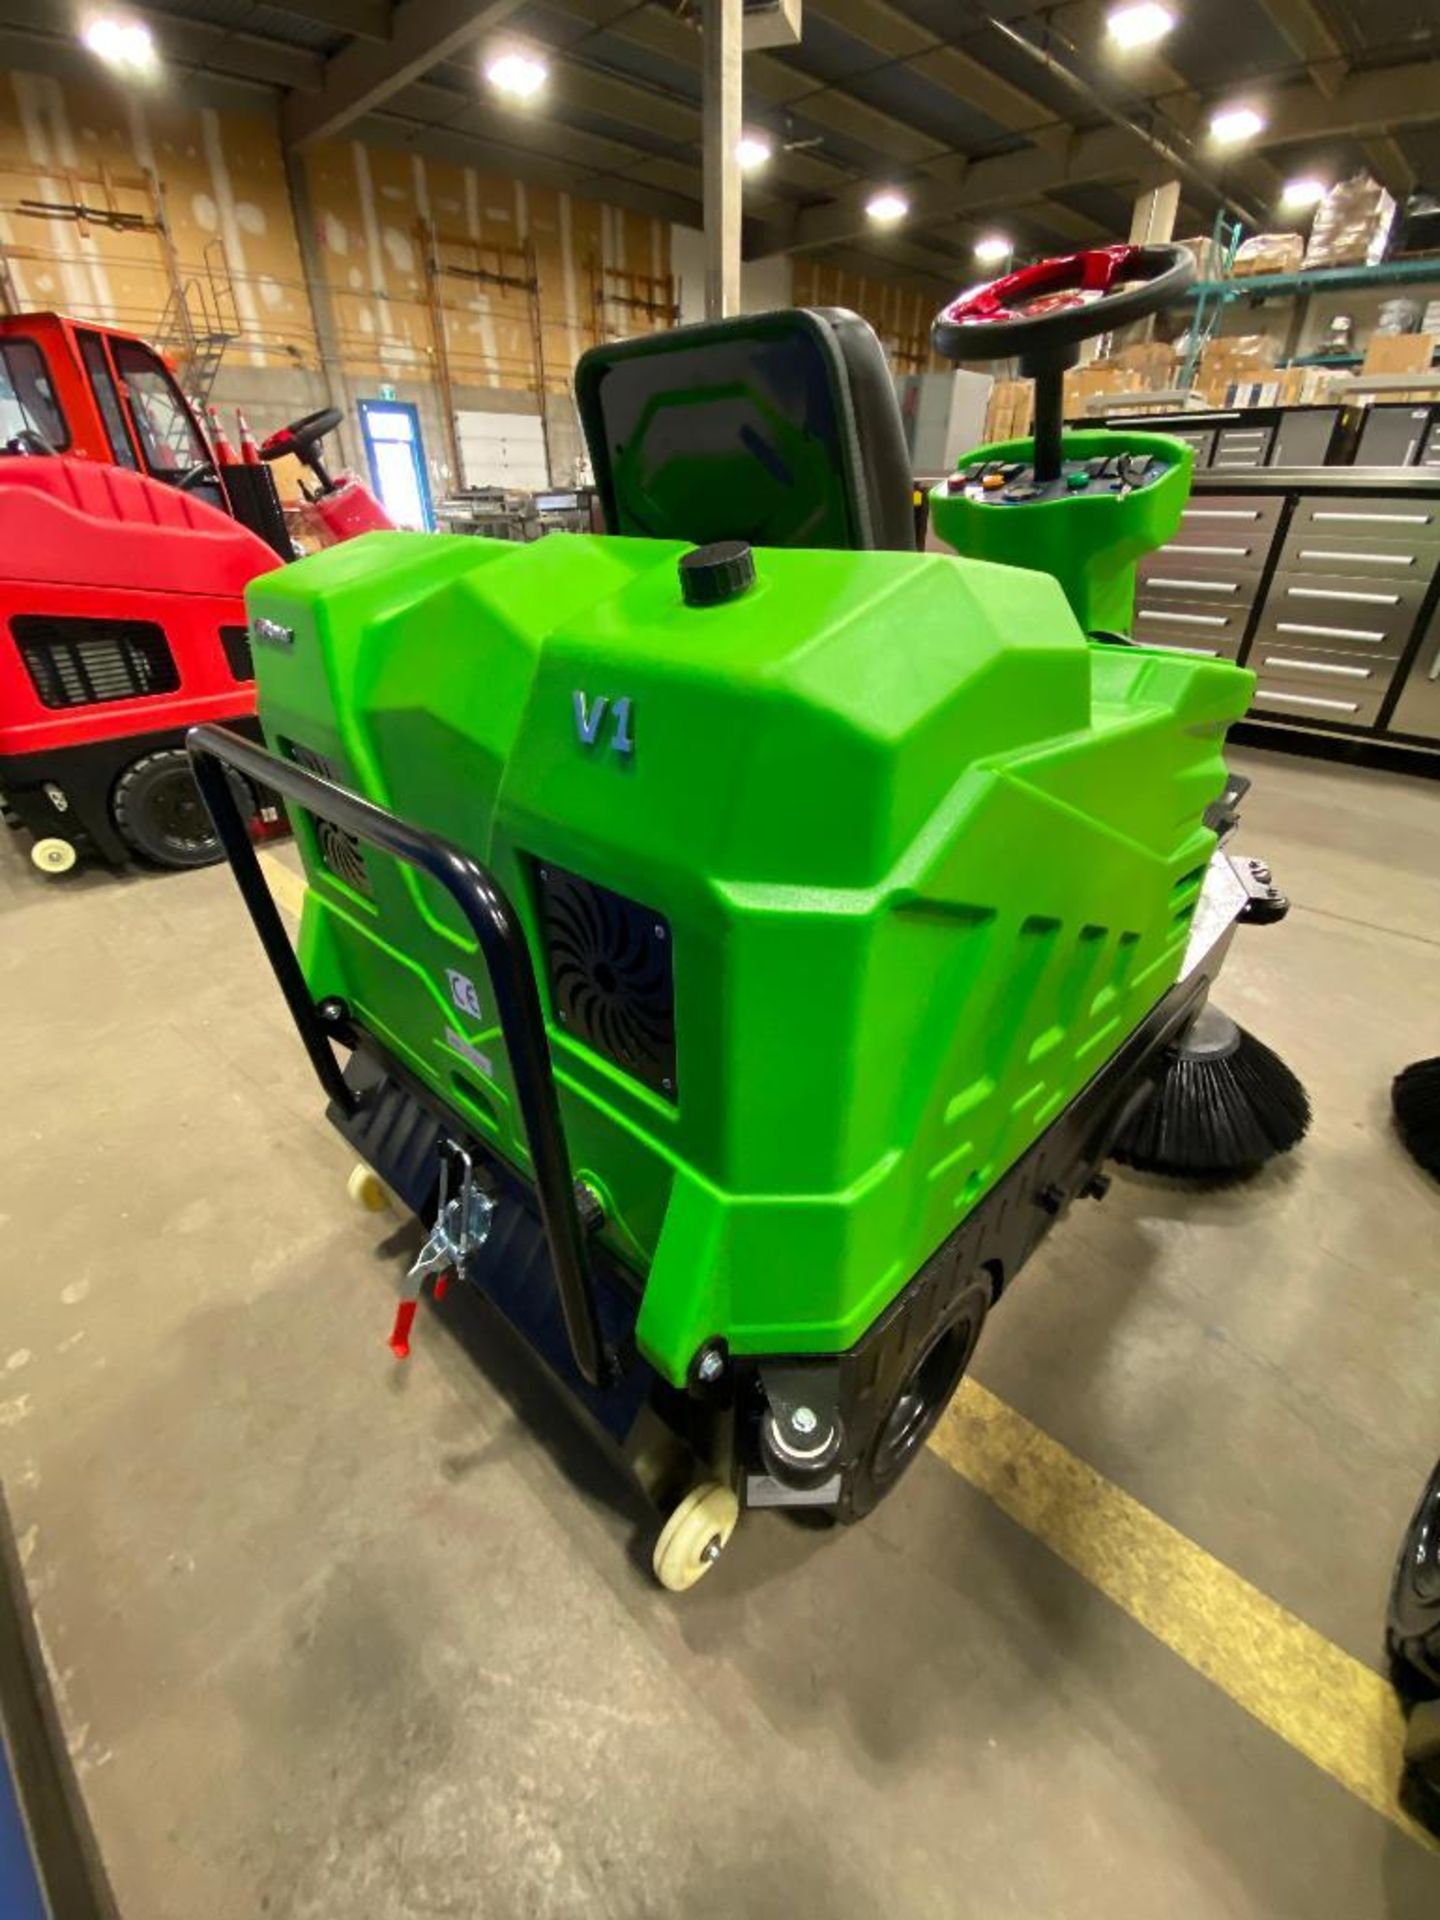 New 2022 aokeqi 0S-V1 43" Wide Ride-On Electric Industrial Floor Sweeper - Image 3 of 10